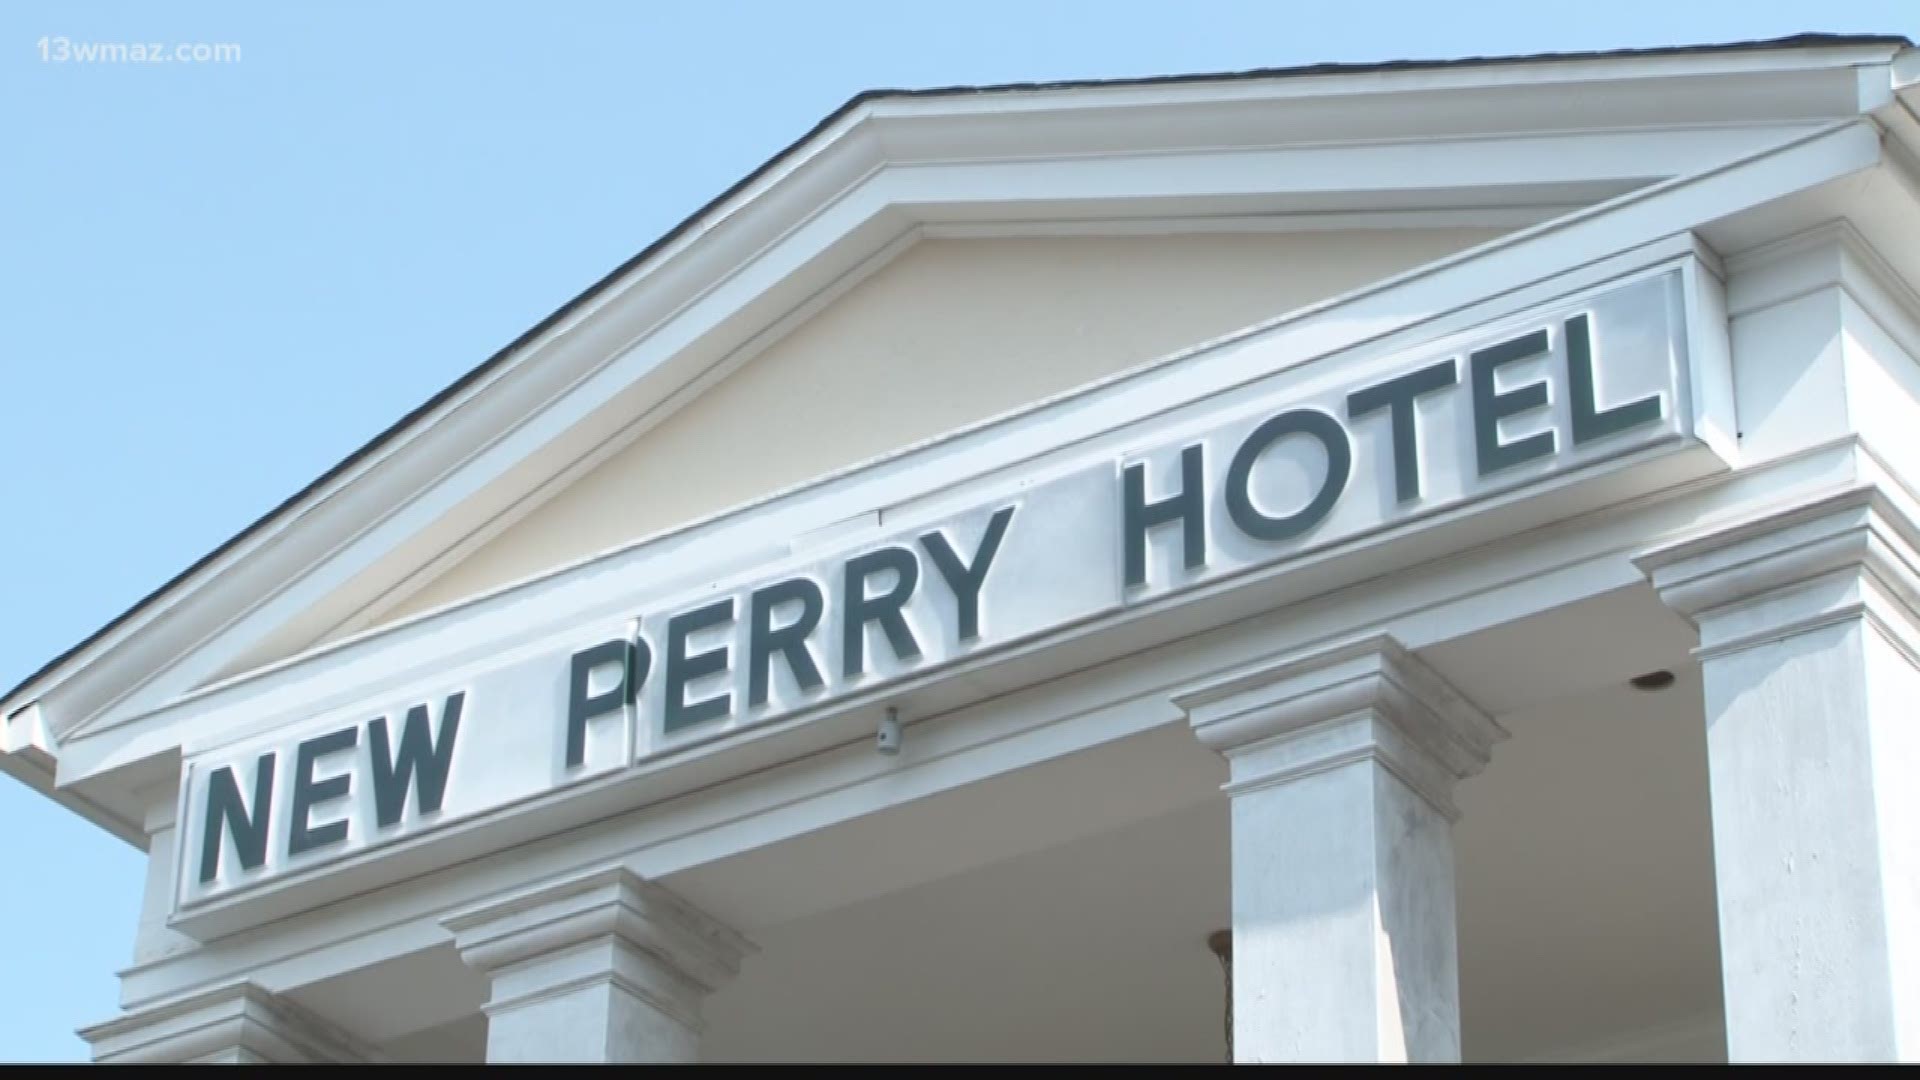 City council reviews use of New Perry Hotel